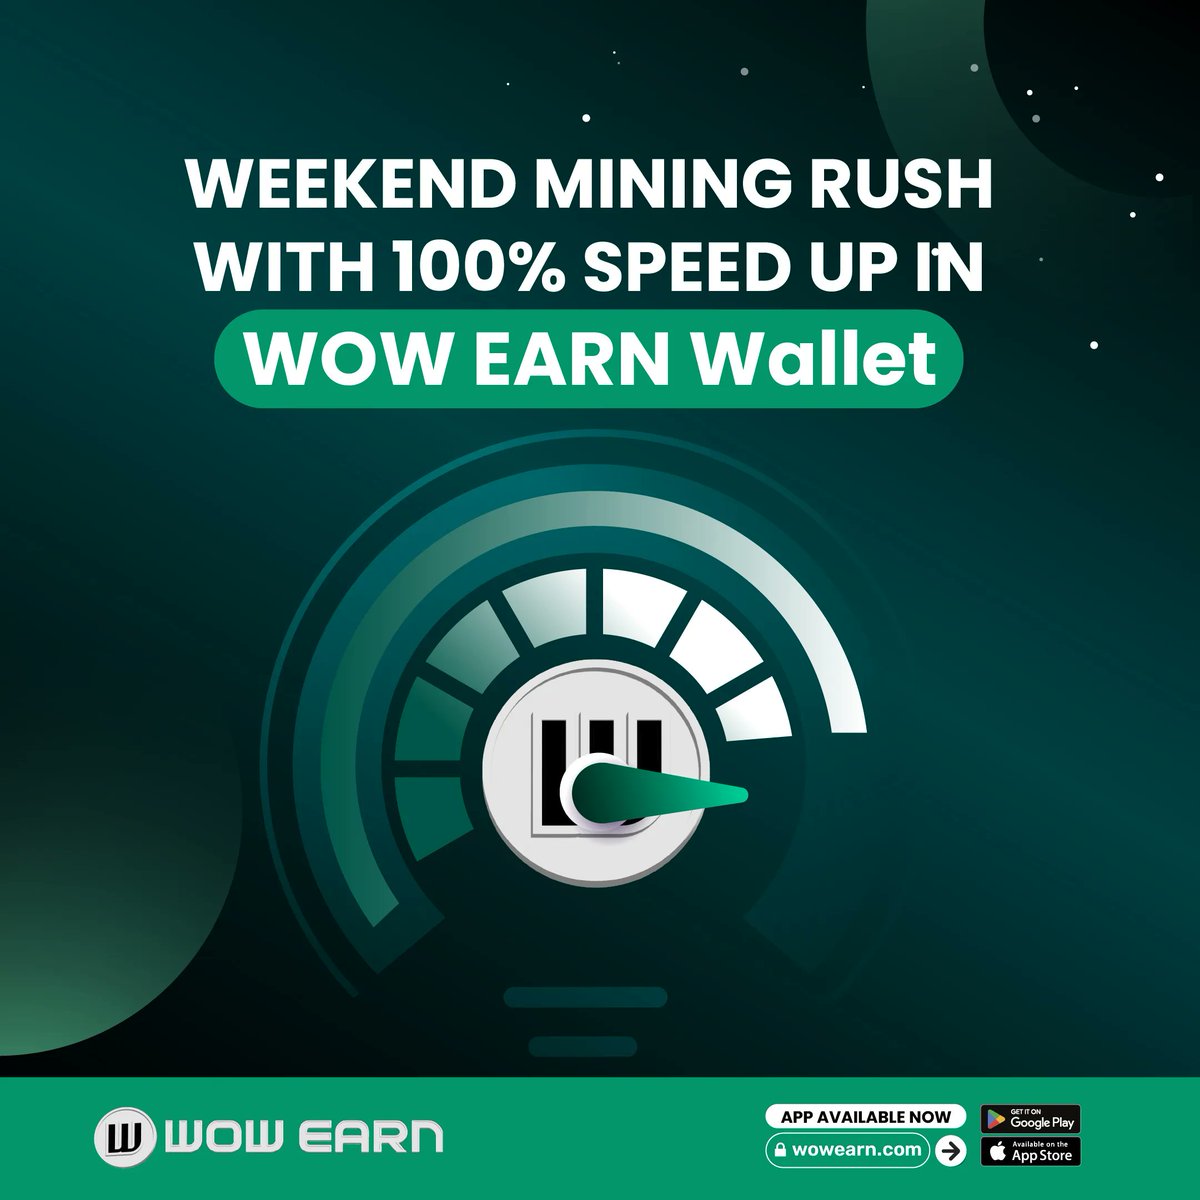 💥 Maximize mining this weekend with our 100% Speed Up! 
Don't miss out on amplified rewards. 
Download WOW EARN Wallet now! ⏰💸 
#WOWEARN #CryptoMining #WeekendRush